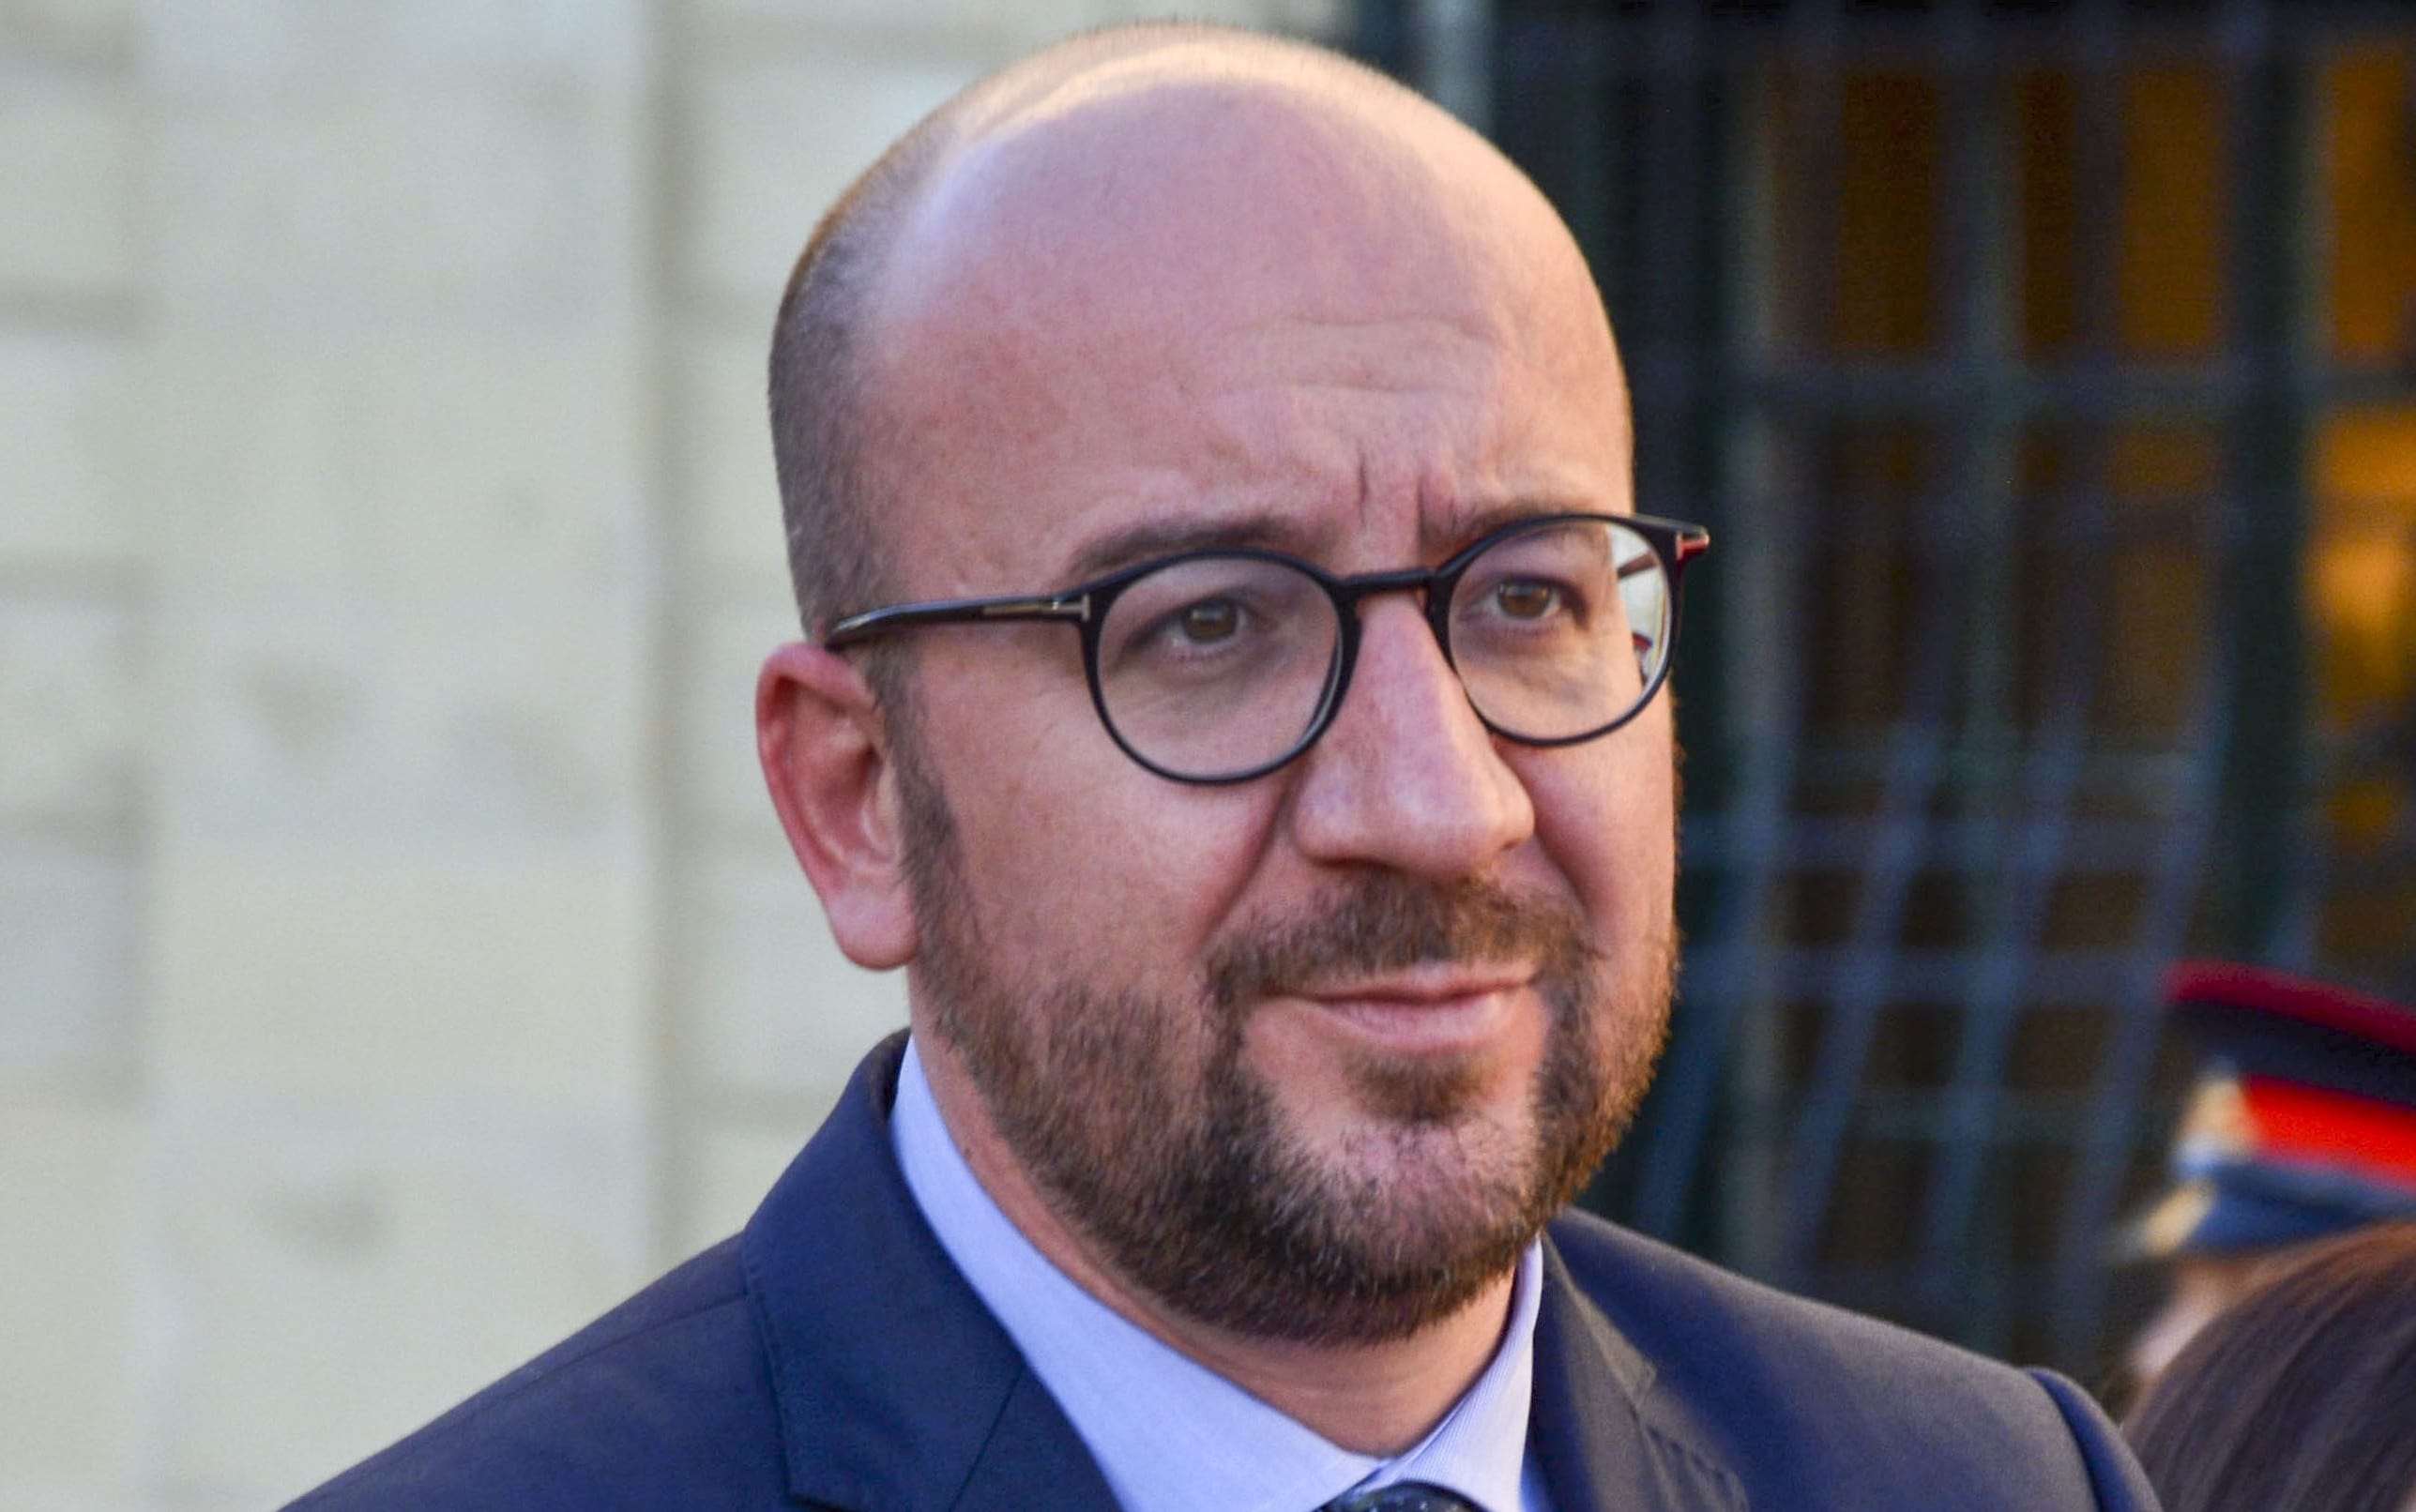 Prime Minister of Belgium Charles Michel arrives in La Valletta for the European Union - Africa Summit on Refugee crisis